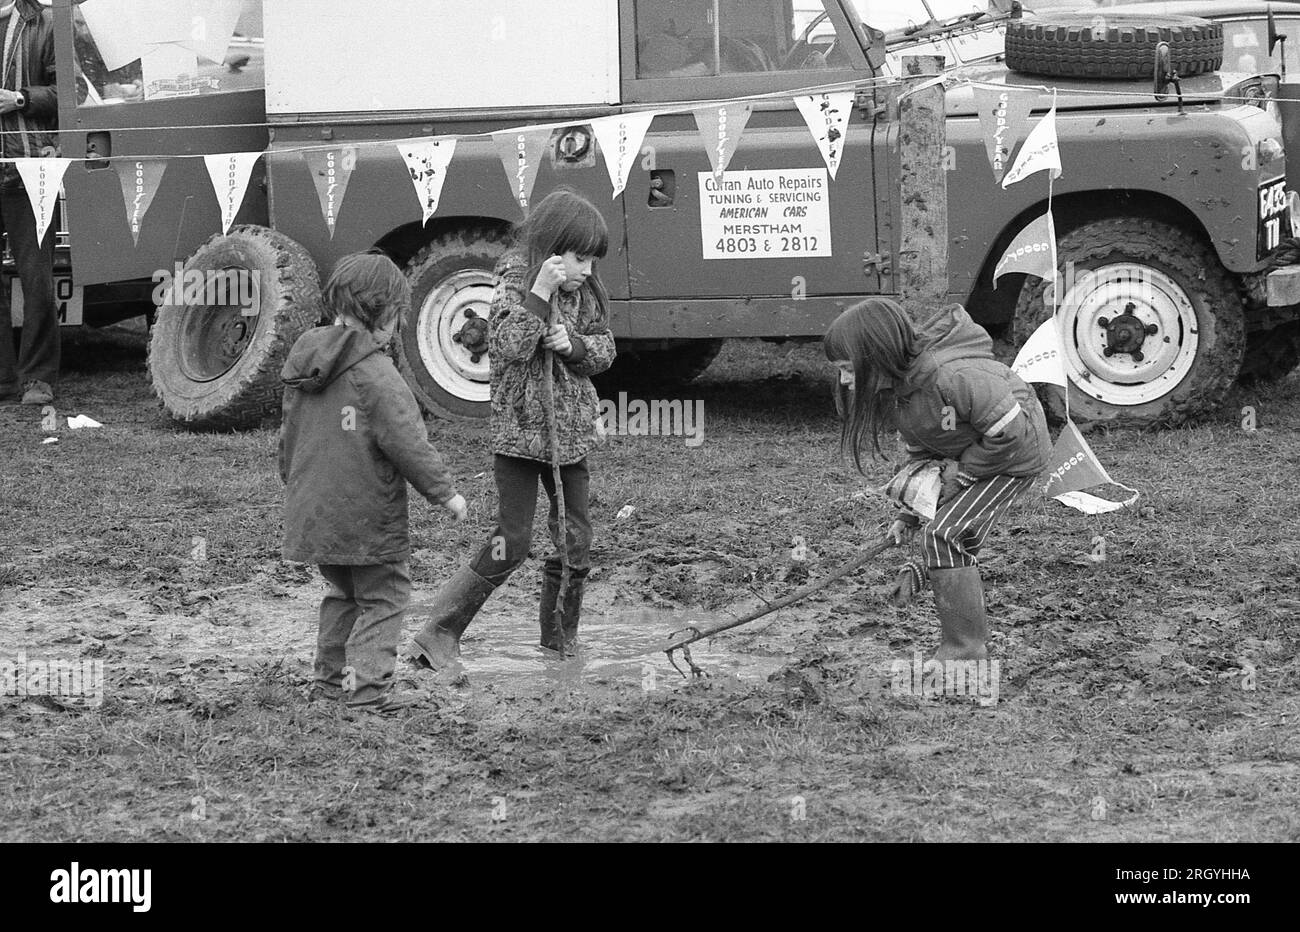 Three young children play in a muddy puddle during an autocross event at Smallfield in Surrey, England on March 6, 1977. Stock Photo